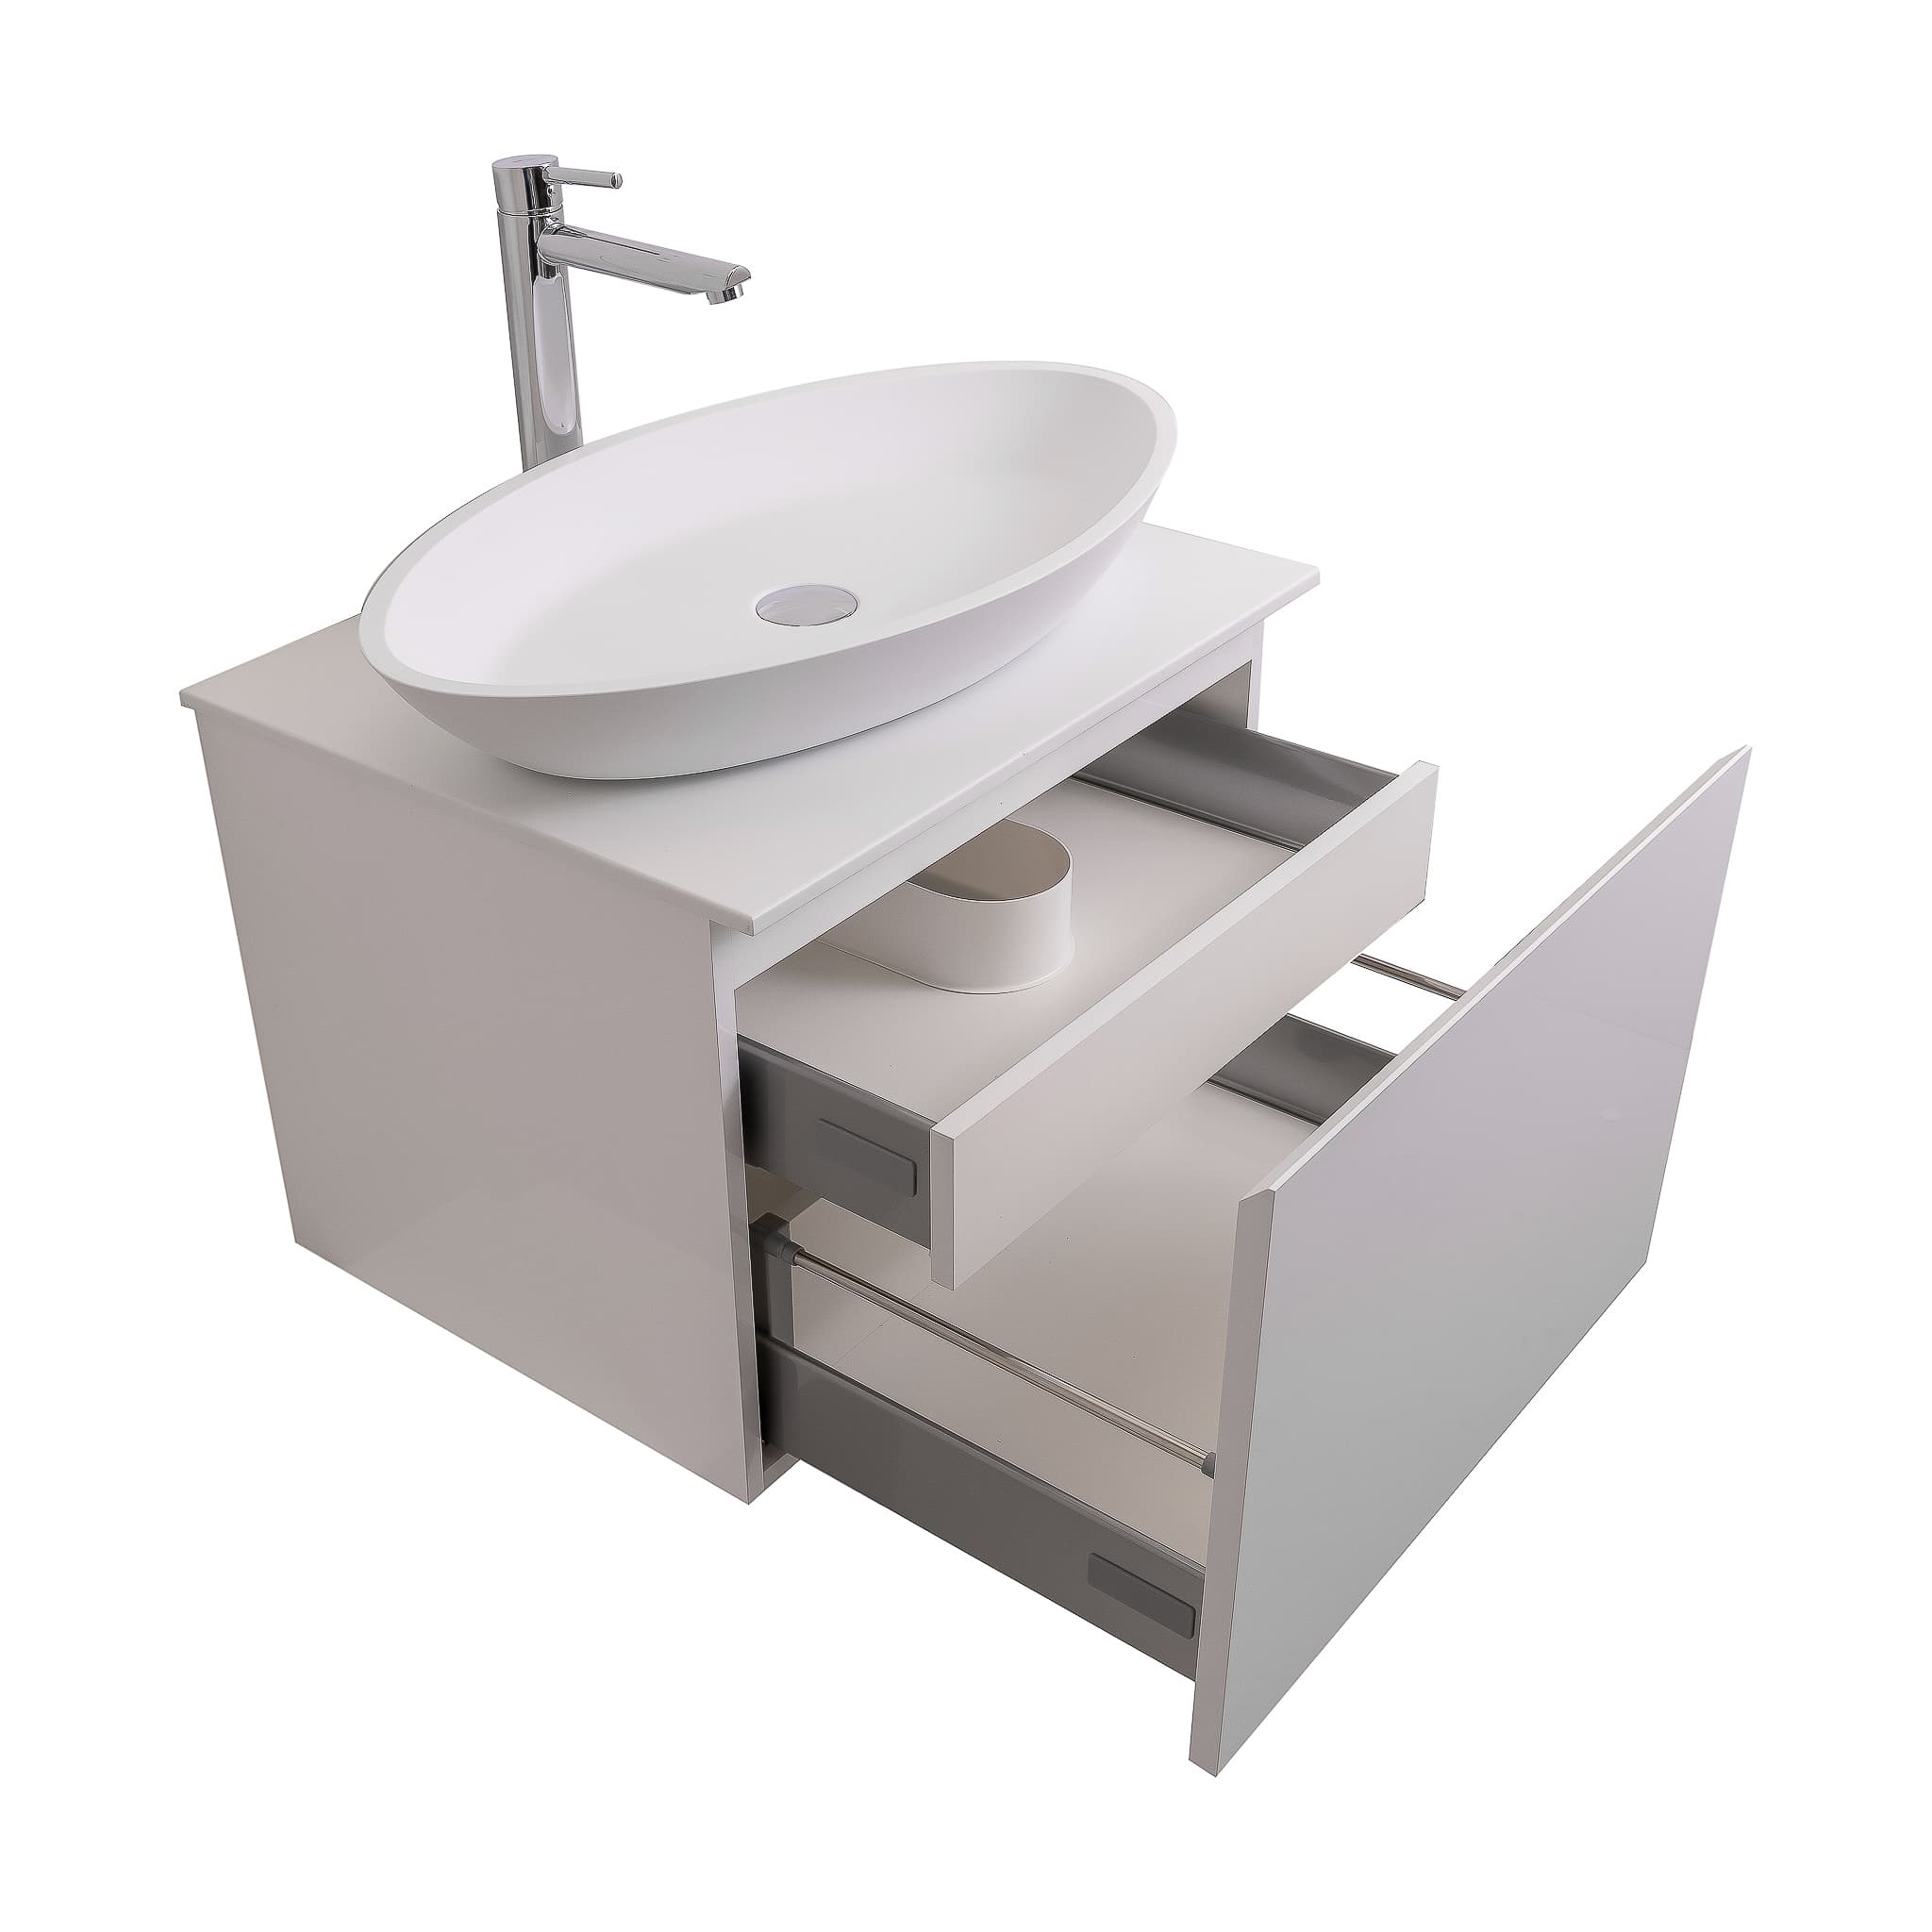 Venice 23.5 White High Gloss Cabinet, Solid Surface Flat White Counter And Oval Solid Surface White Basin 1305, Wall Mounted Modern Vanity Set